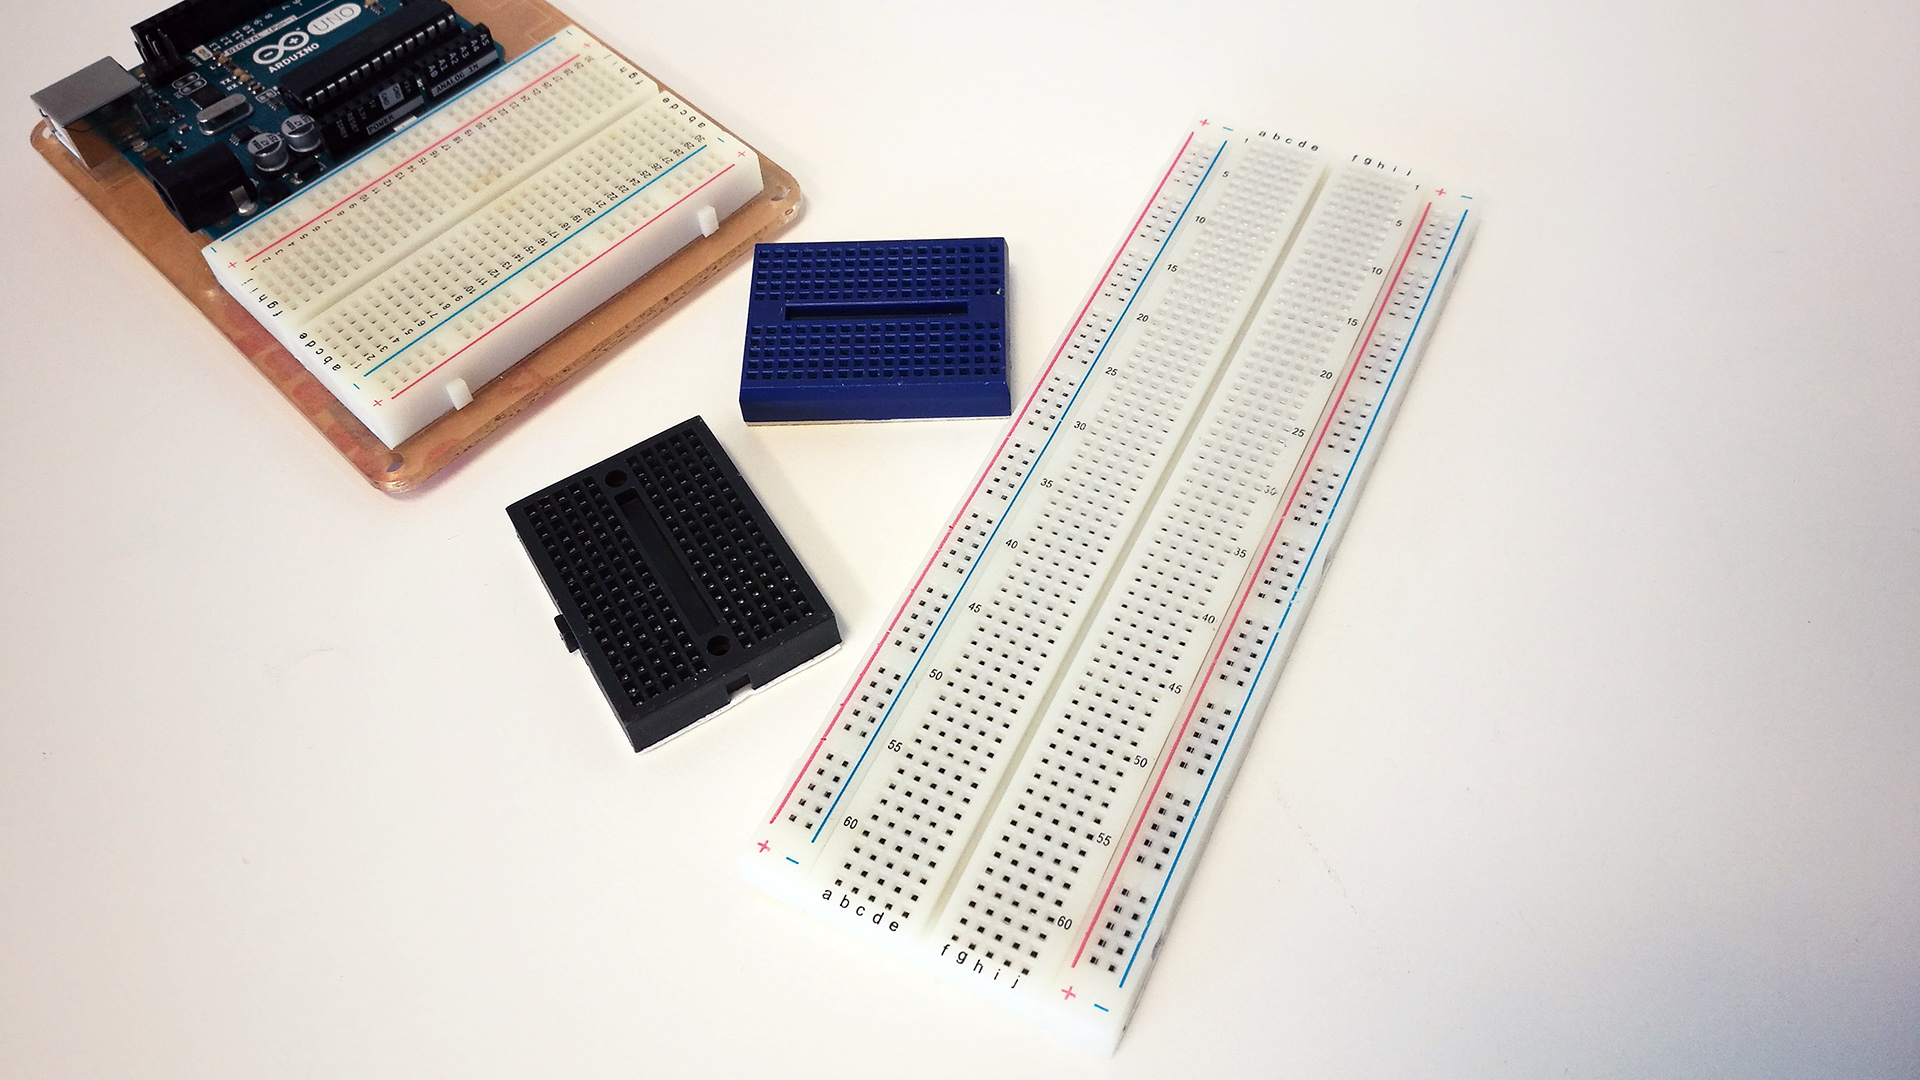 What is a Breadboard?